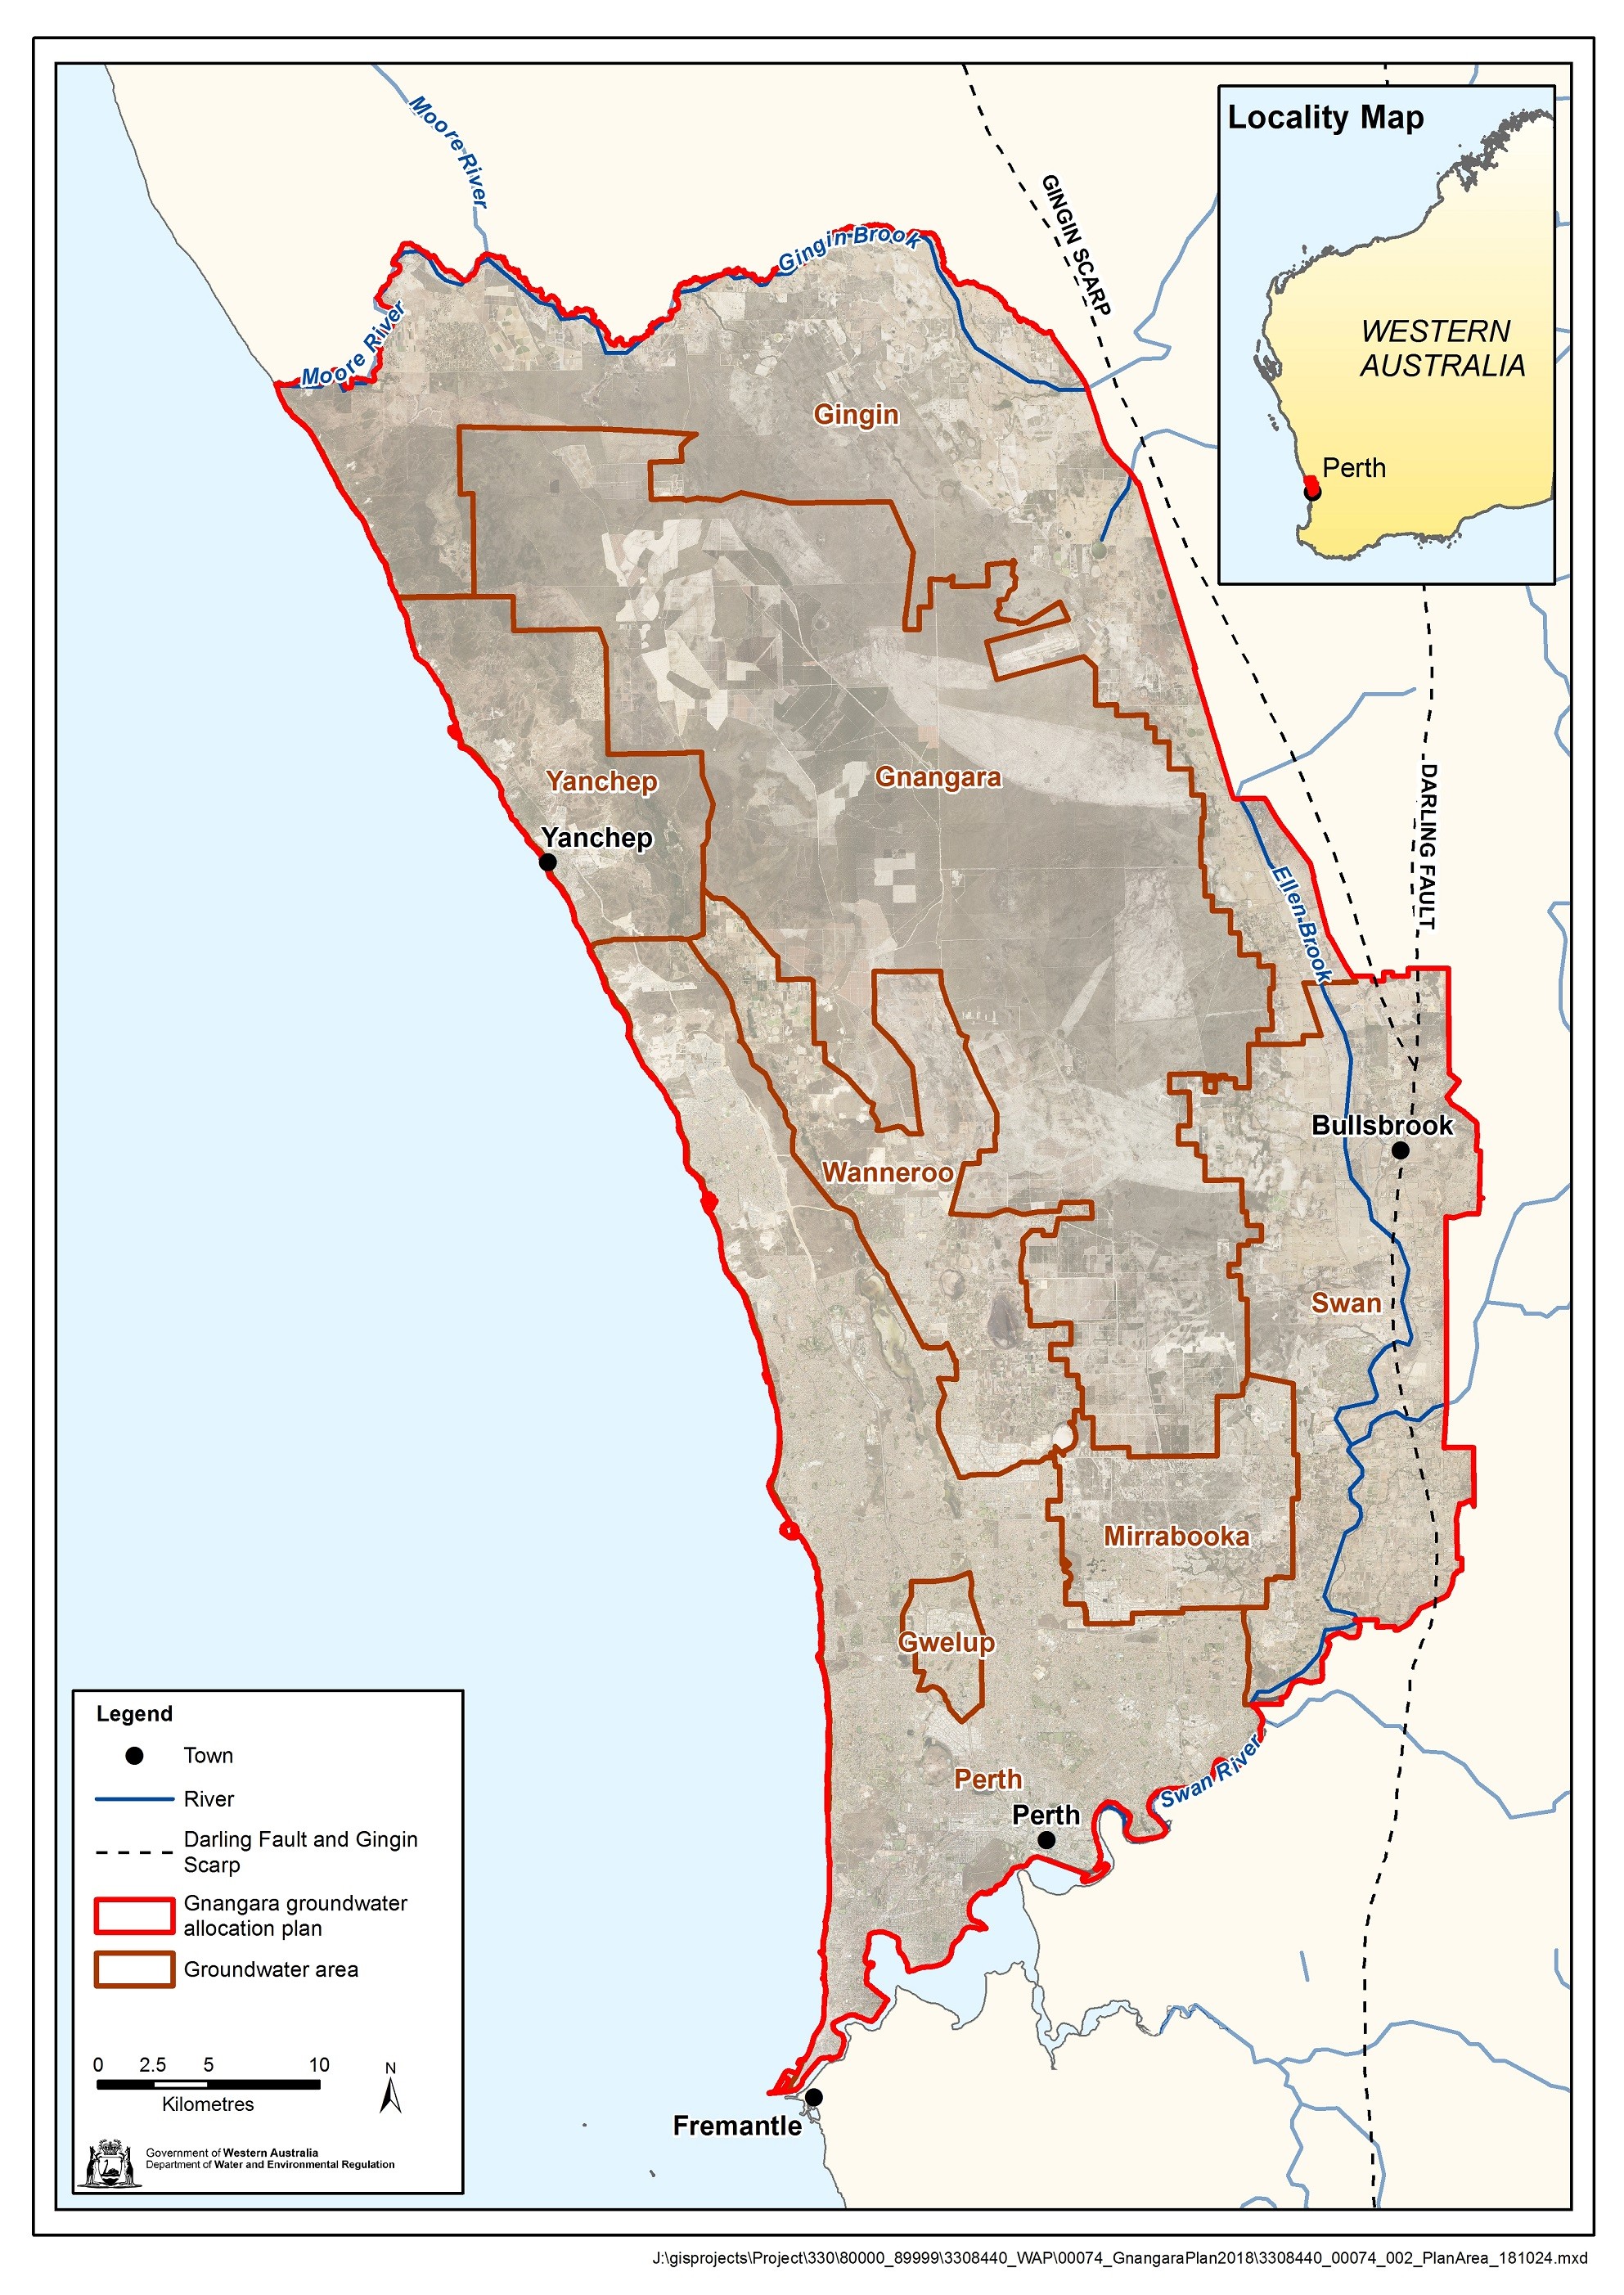 Gnangara plan area and groundwater areas covered